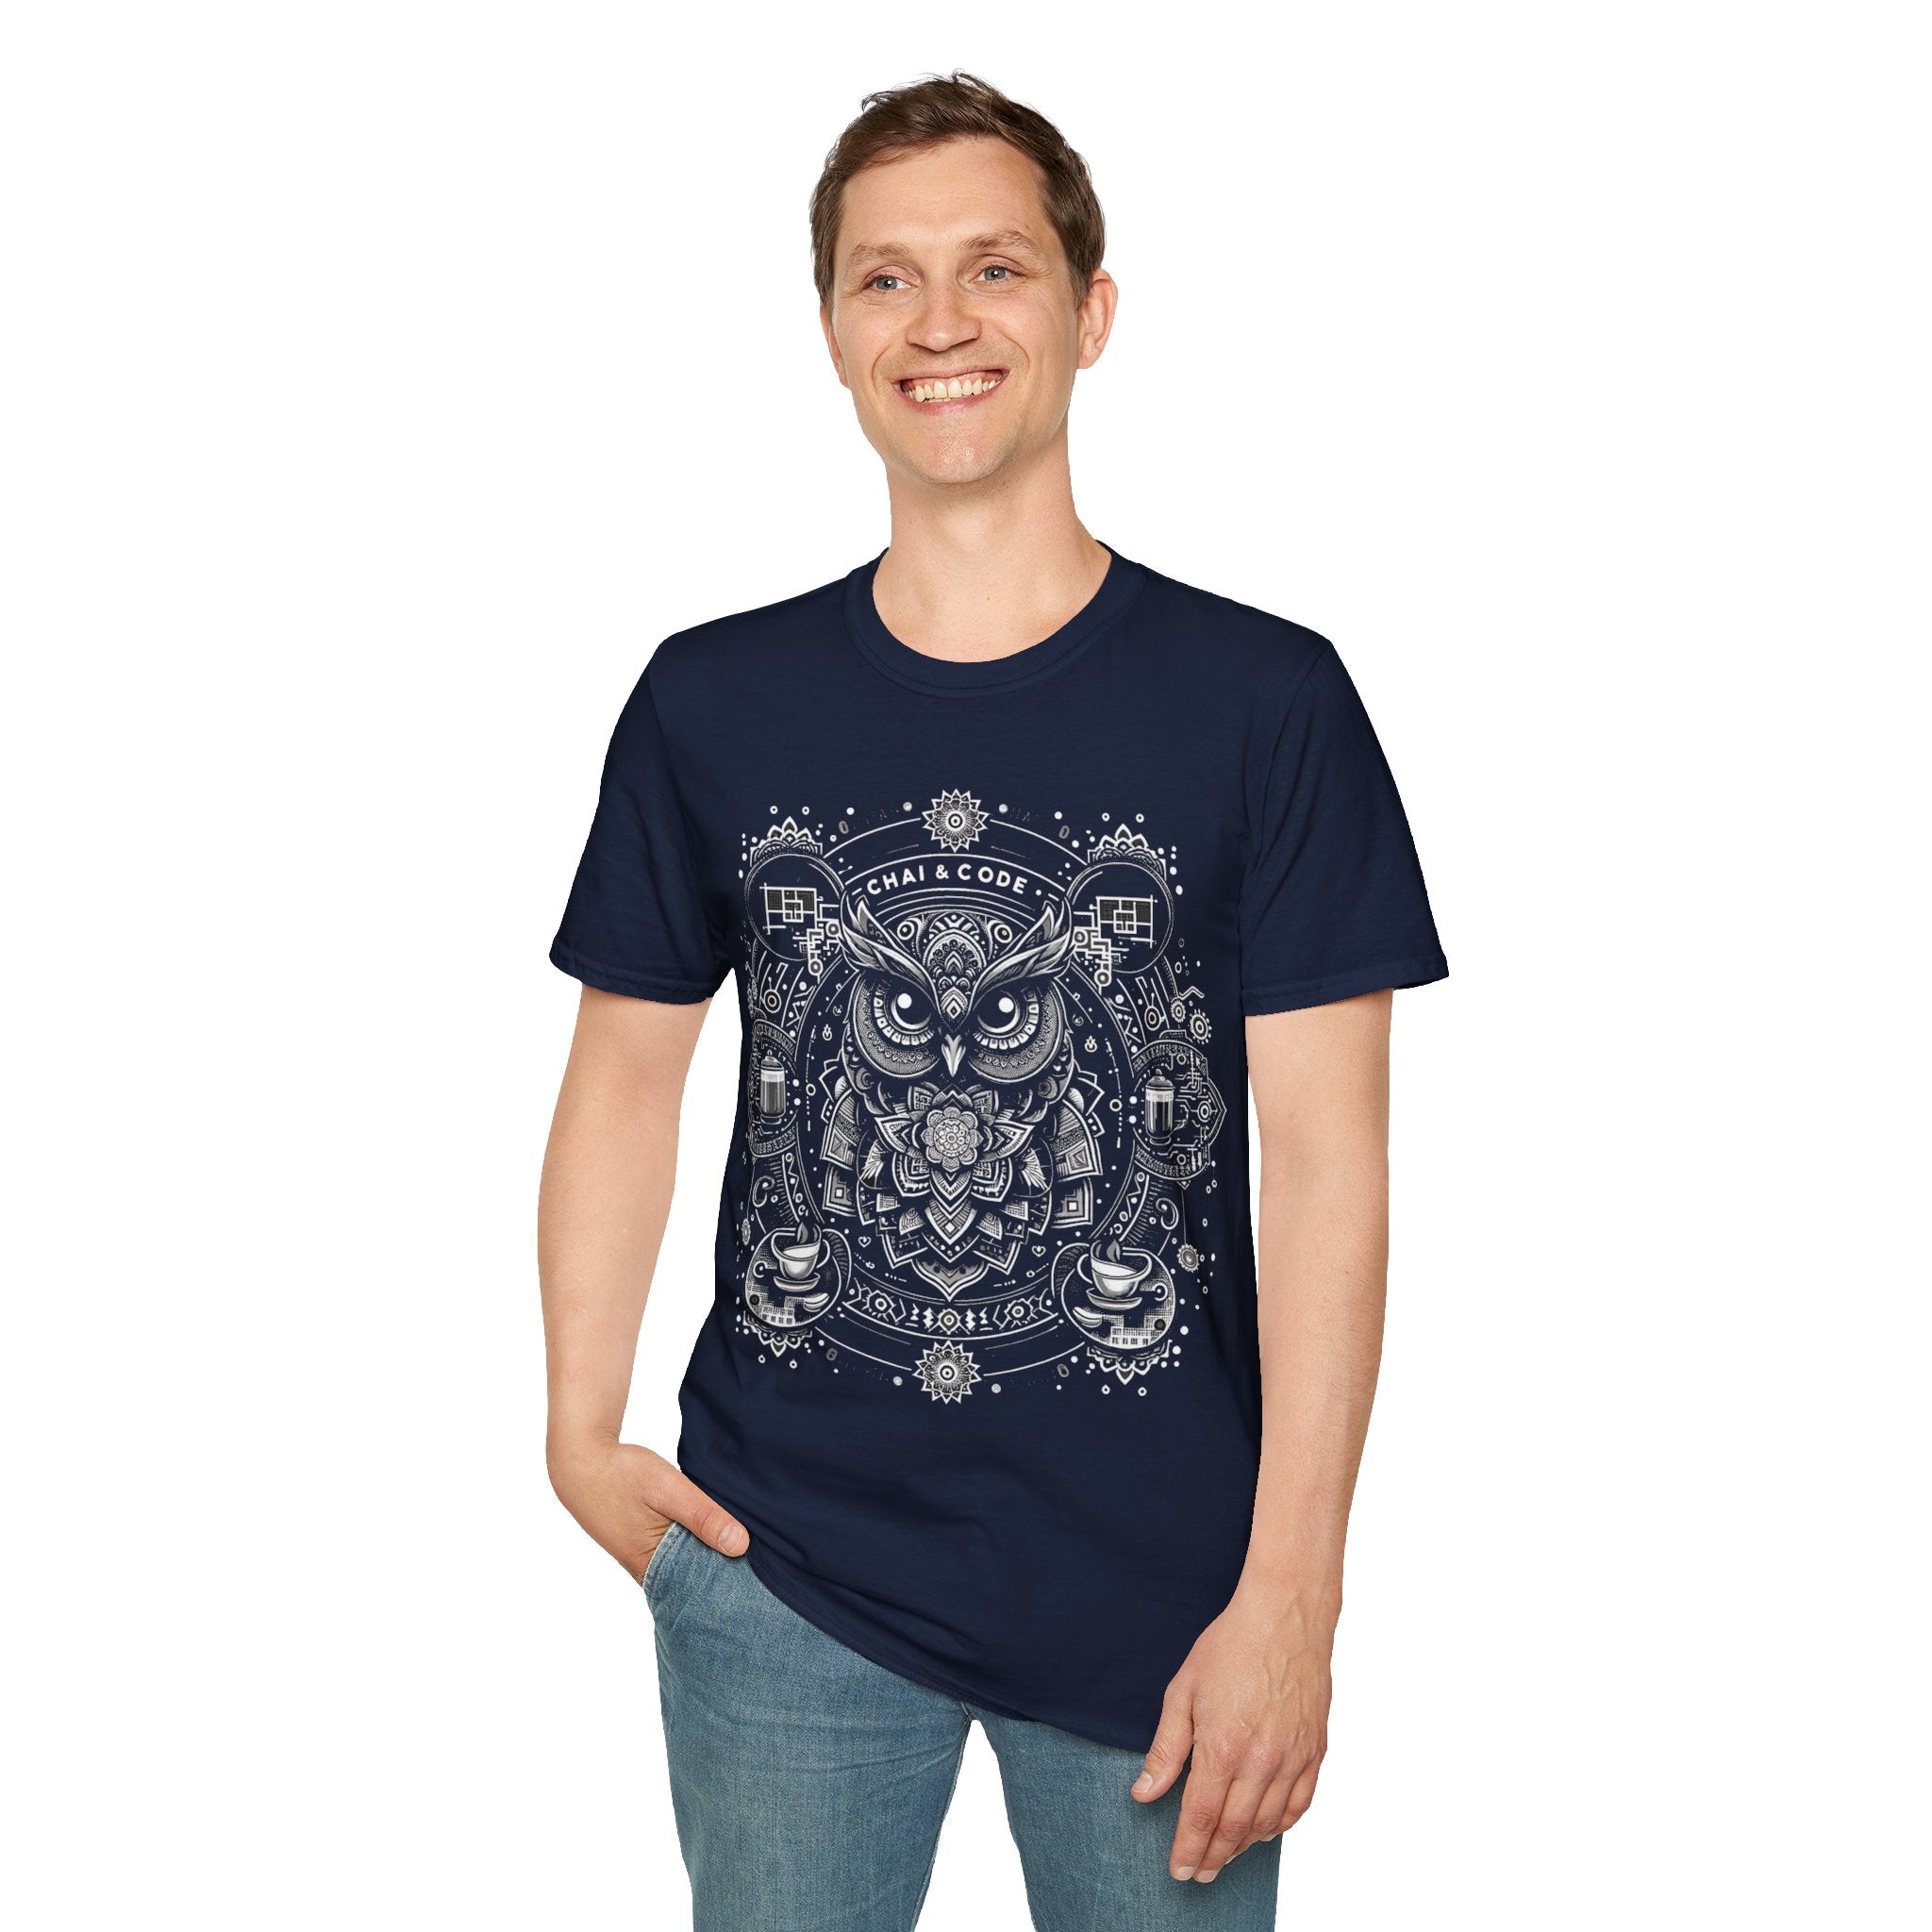 Mandala Tech Tees - Unwind in Style with Chai and Code